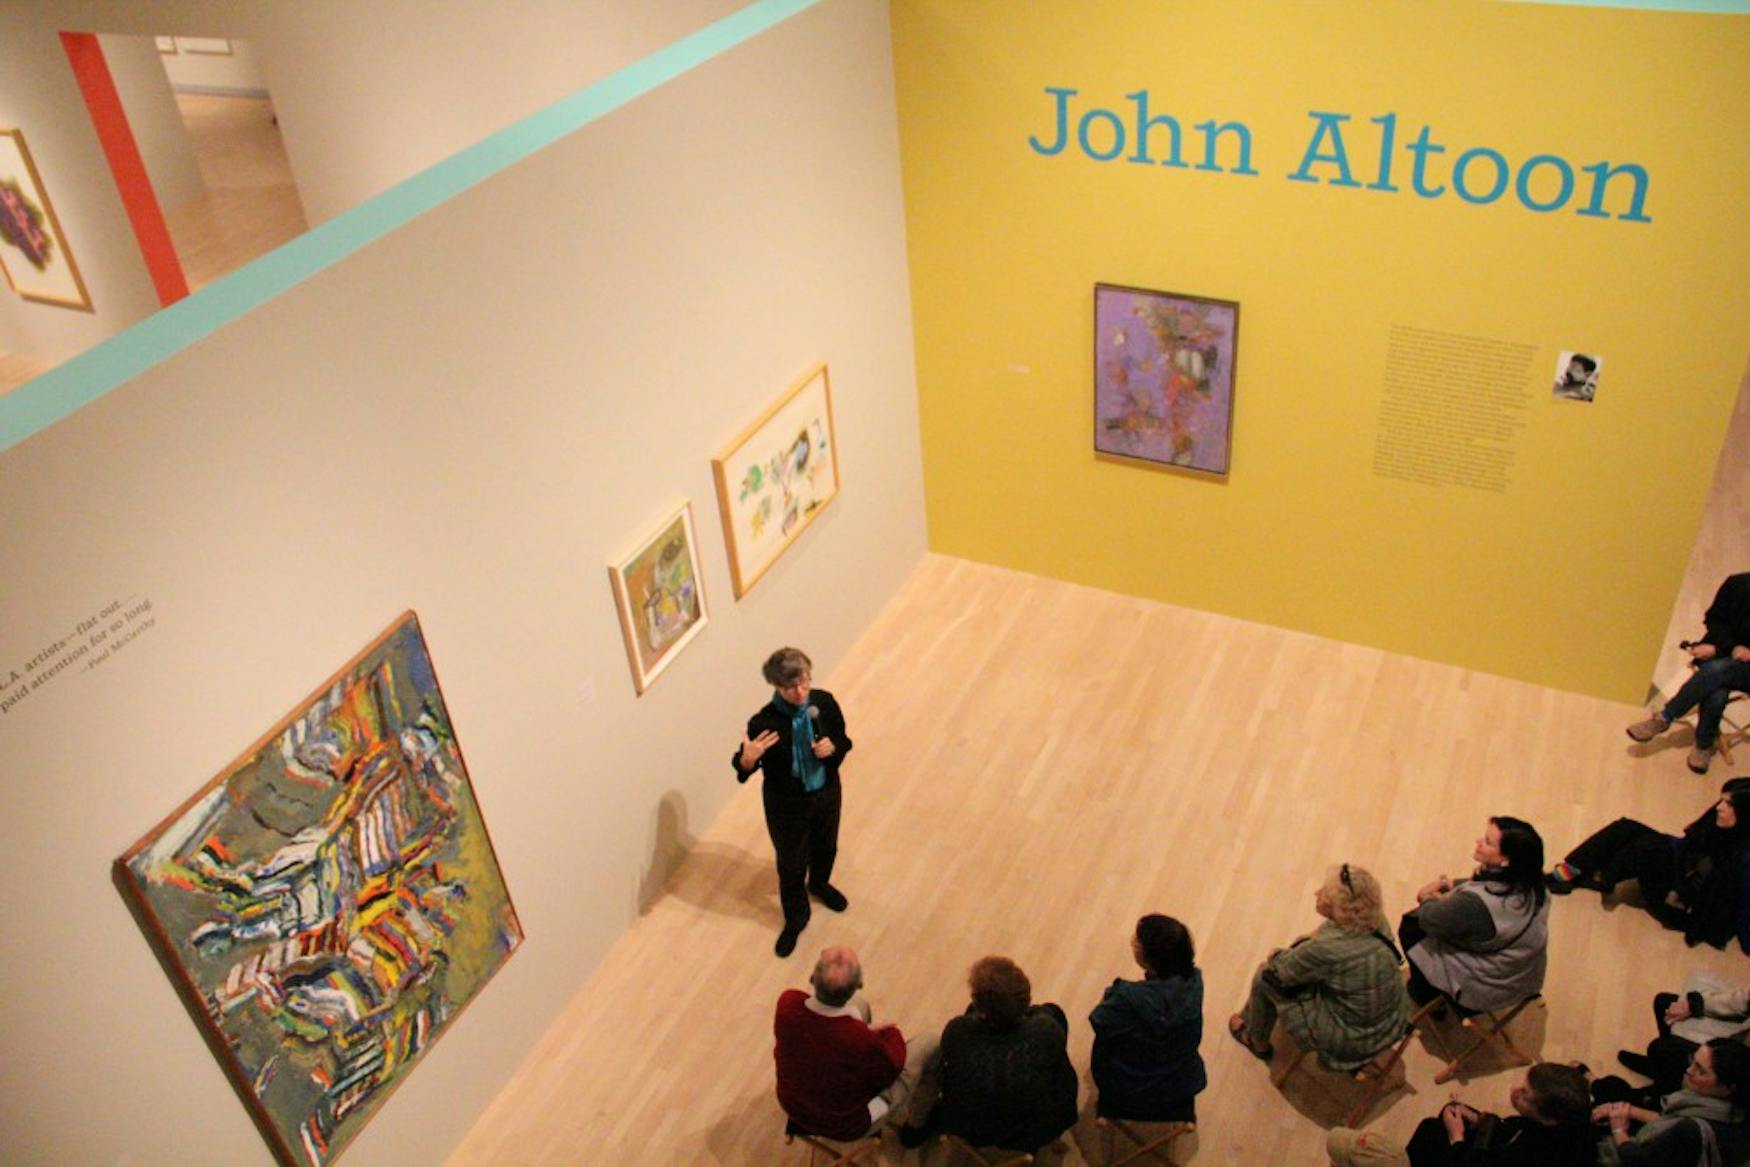 TALK TIME: Carol Eliel, curator of modern art at the Los Angeles County Museum of Art and curator of the exhibit, spoke on Wednesday evening during the opening of John Altoon about the titular artist.